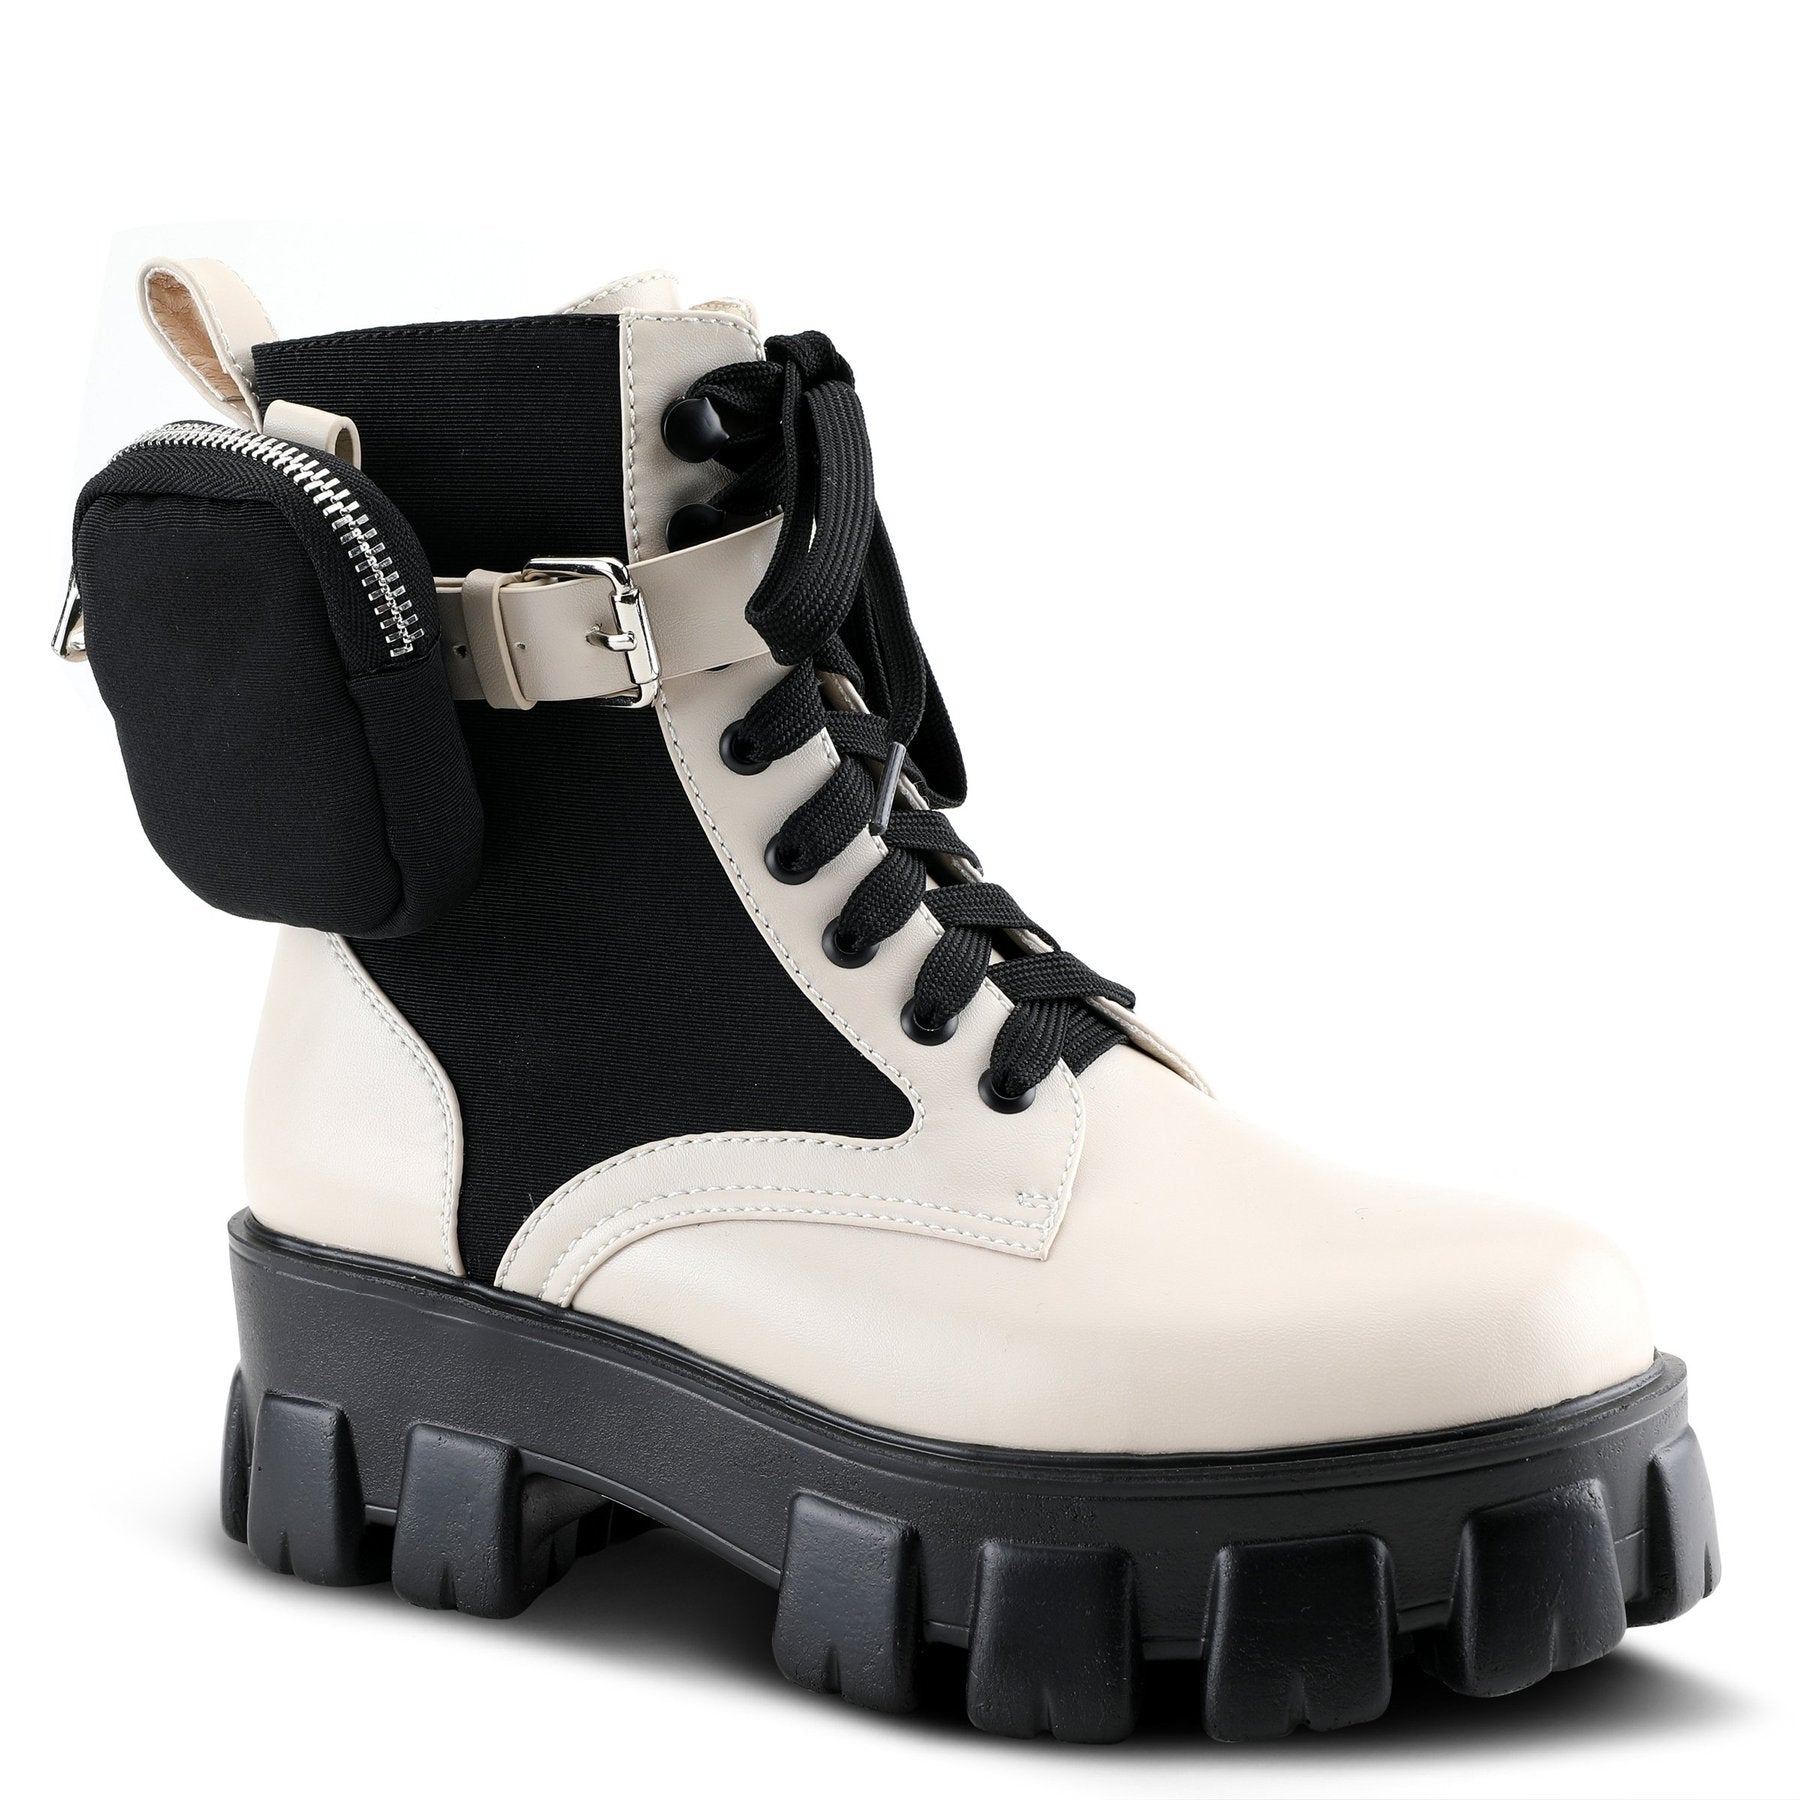 Outer front side view of a azura stoked boot. This boot is beige and black with a black lace up front and a black lug sole. The boot has a decorative strap around the ankle with a mini zip pouch attached. 